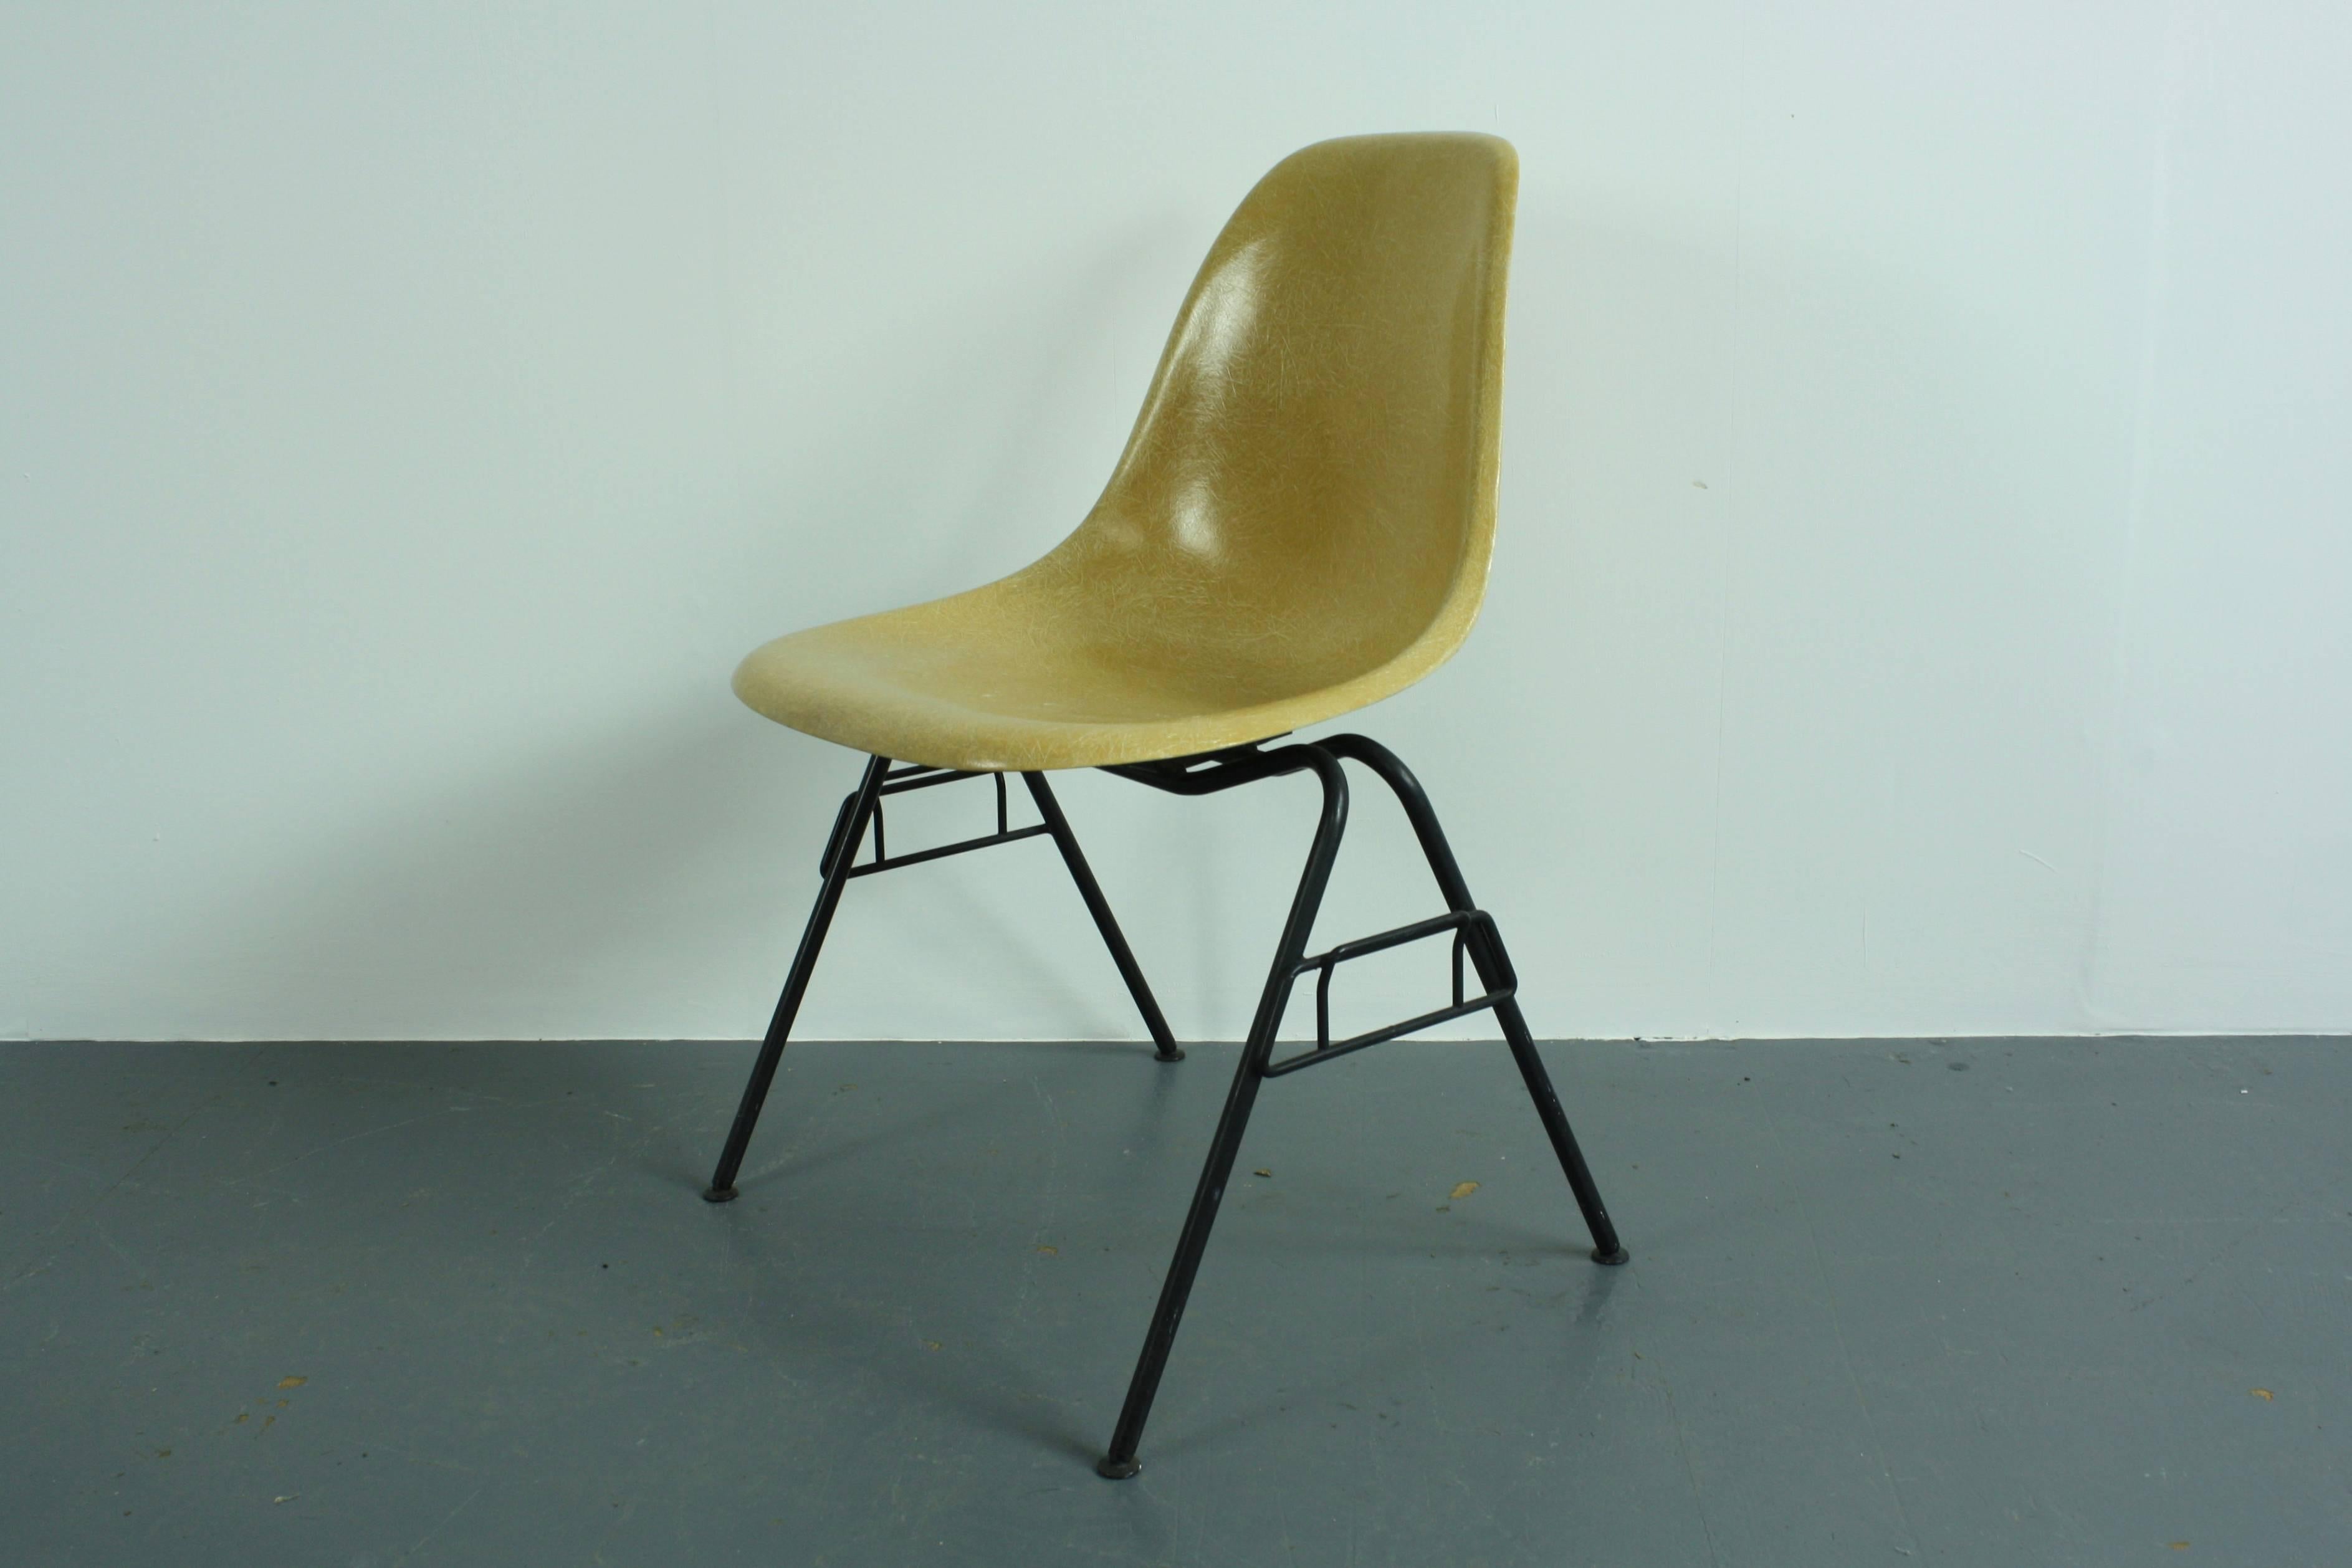 DSS chair designed by Charles Eames and made by Herman Miller in the late 1950s-early 1960s. Original fiberglass weaves shell in light ochre, with an original stacking base. Original Herman Miller stamp on underside of shell.

The contemporary